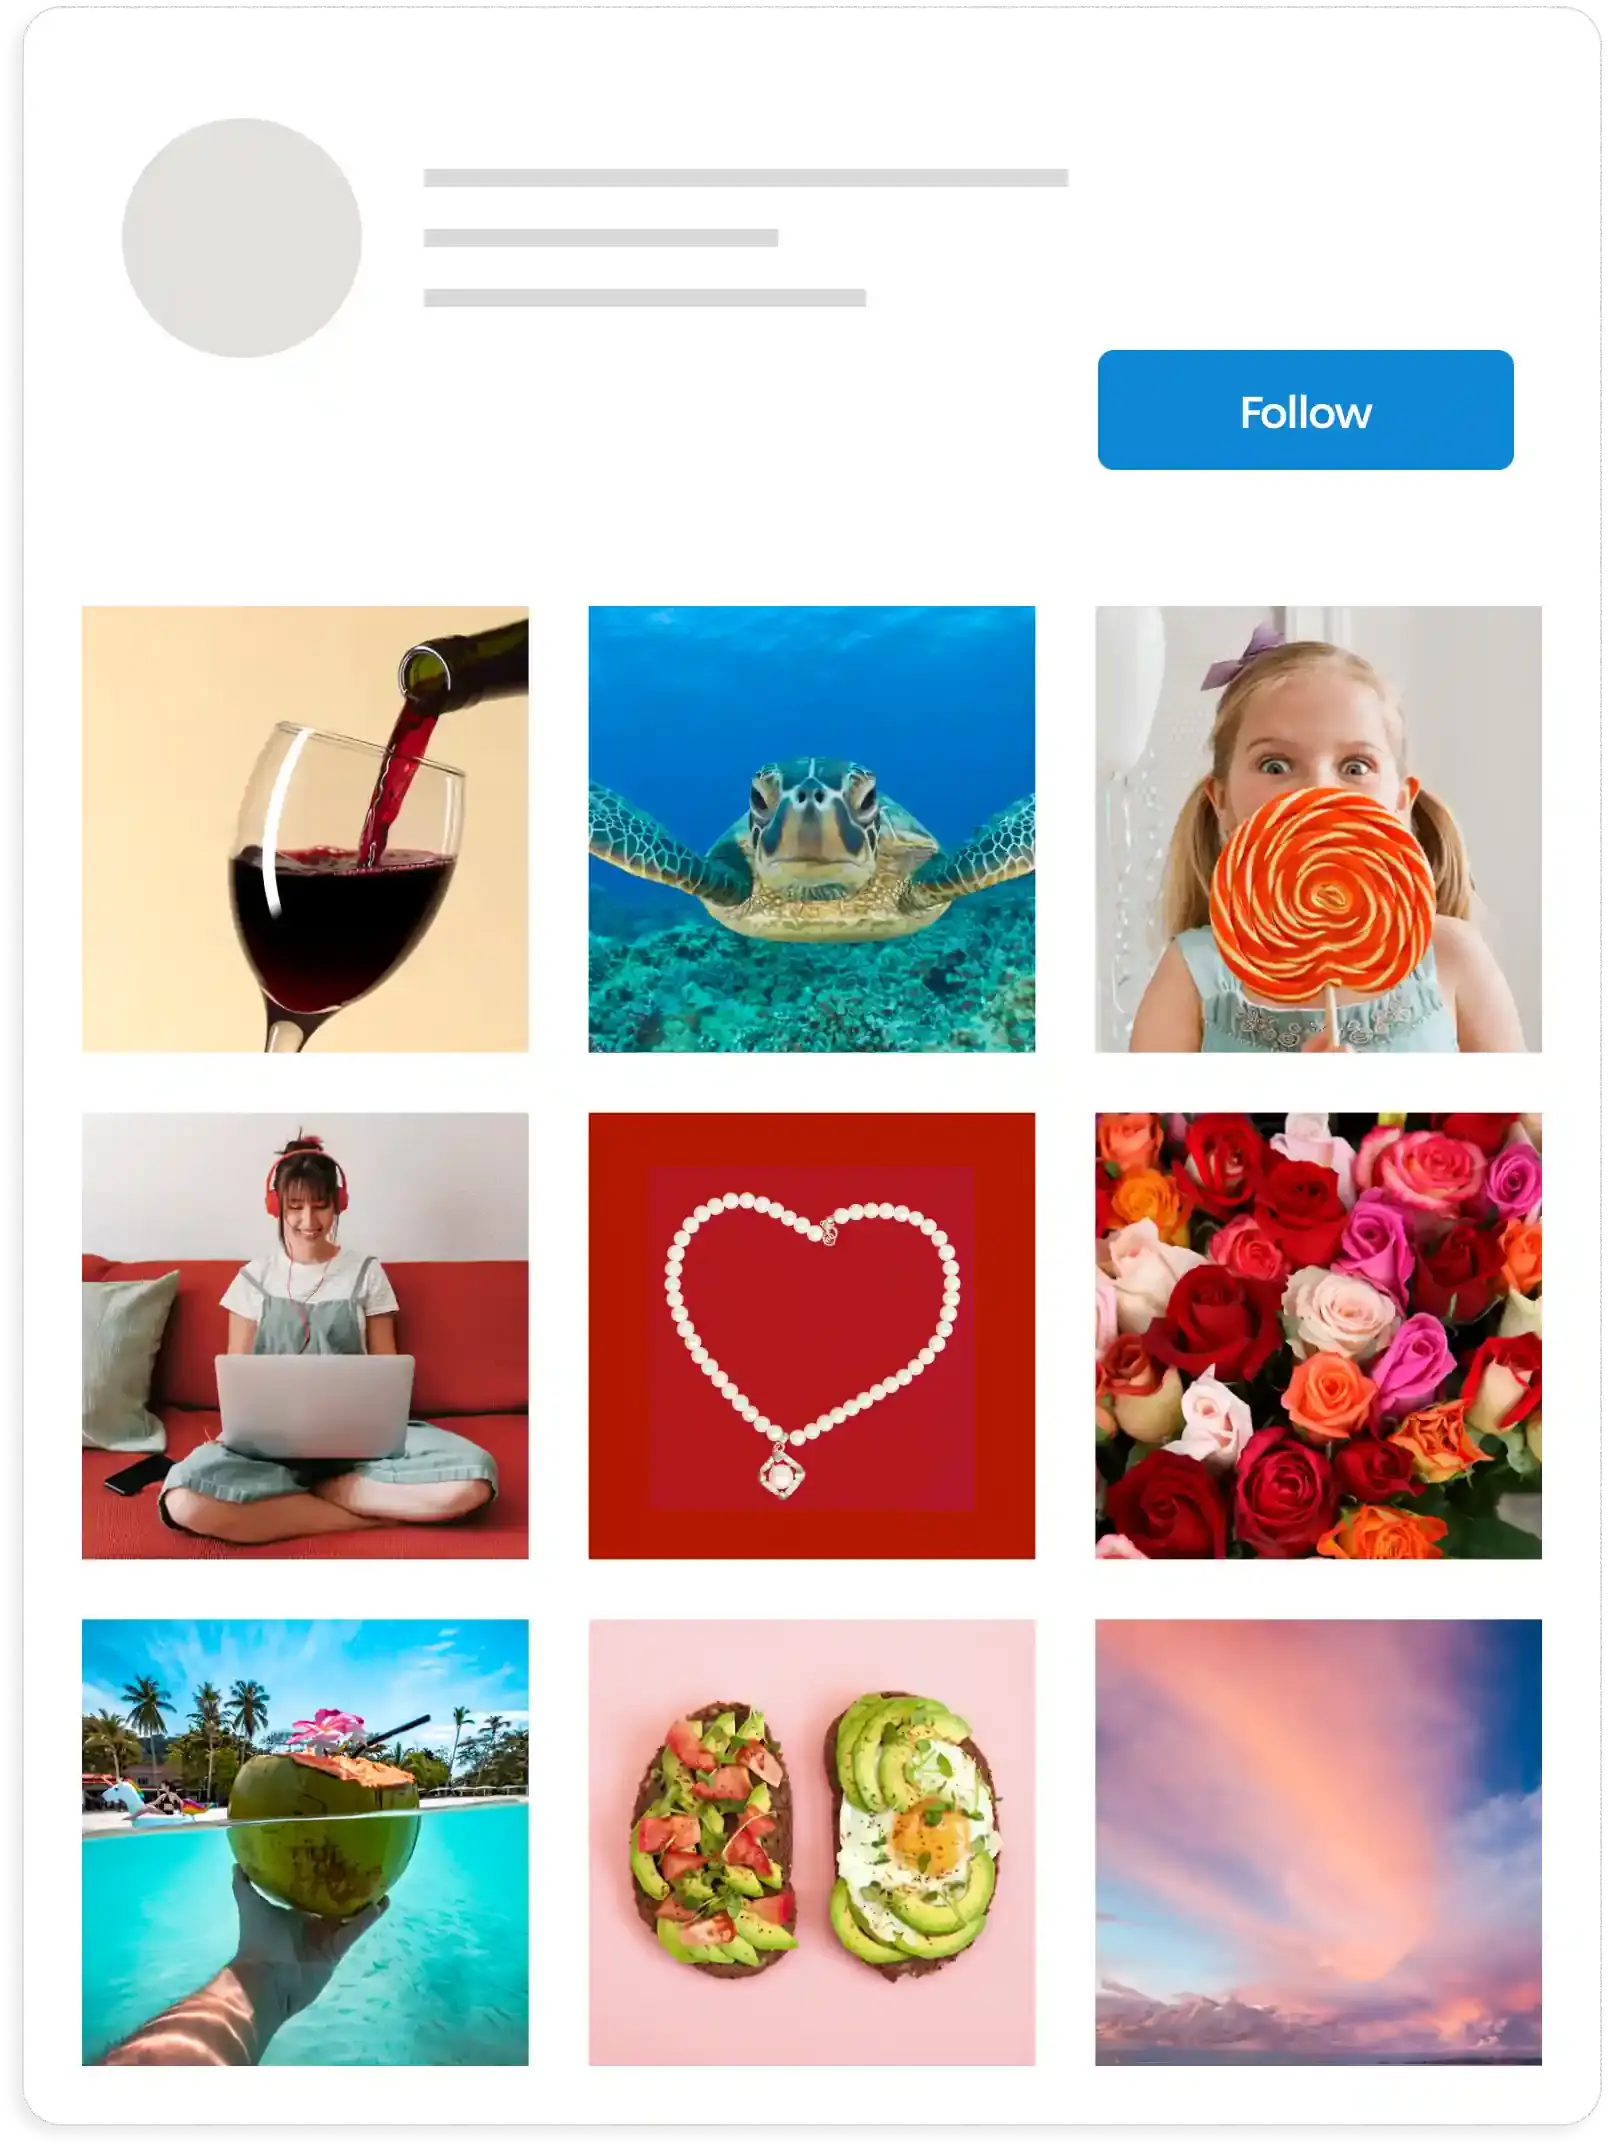 Example of an Instagram feed grid with images that don't seem to be focused on any specific topic.